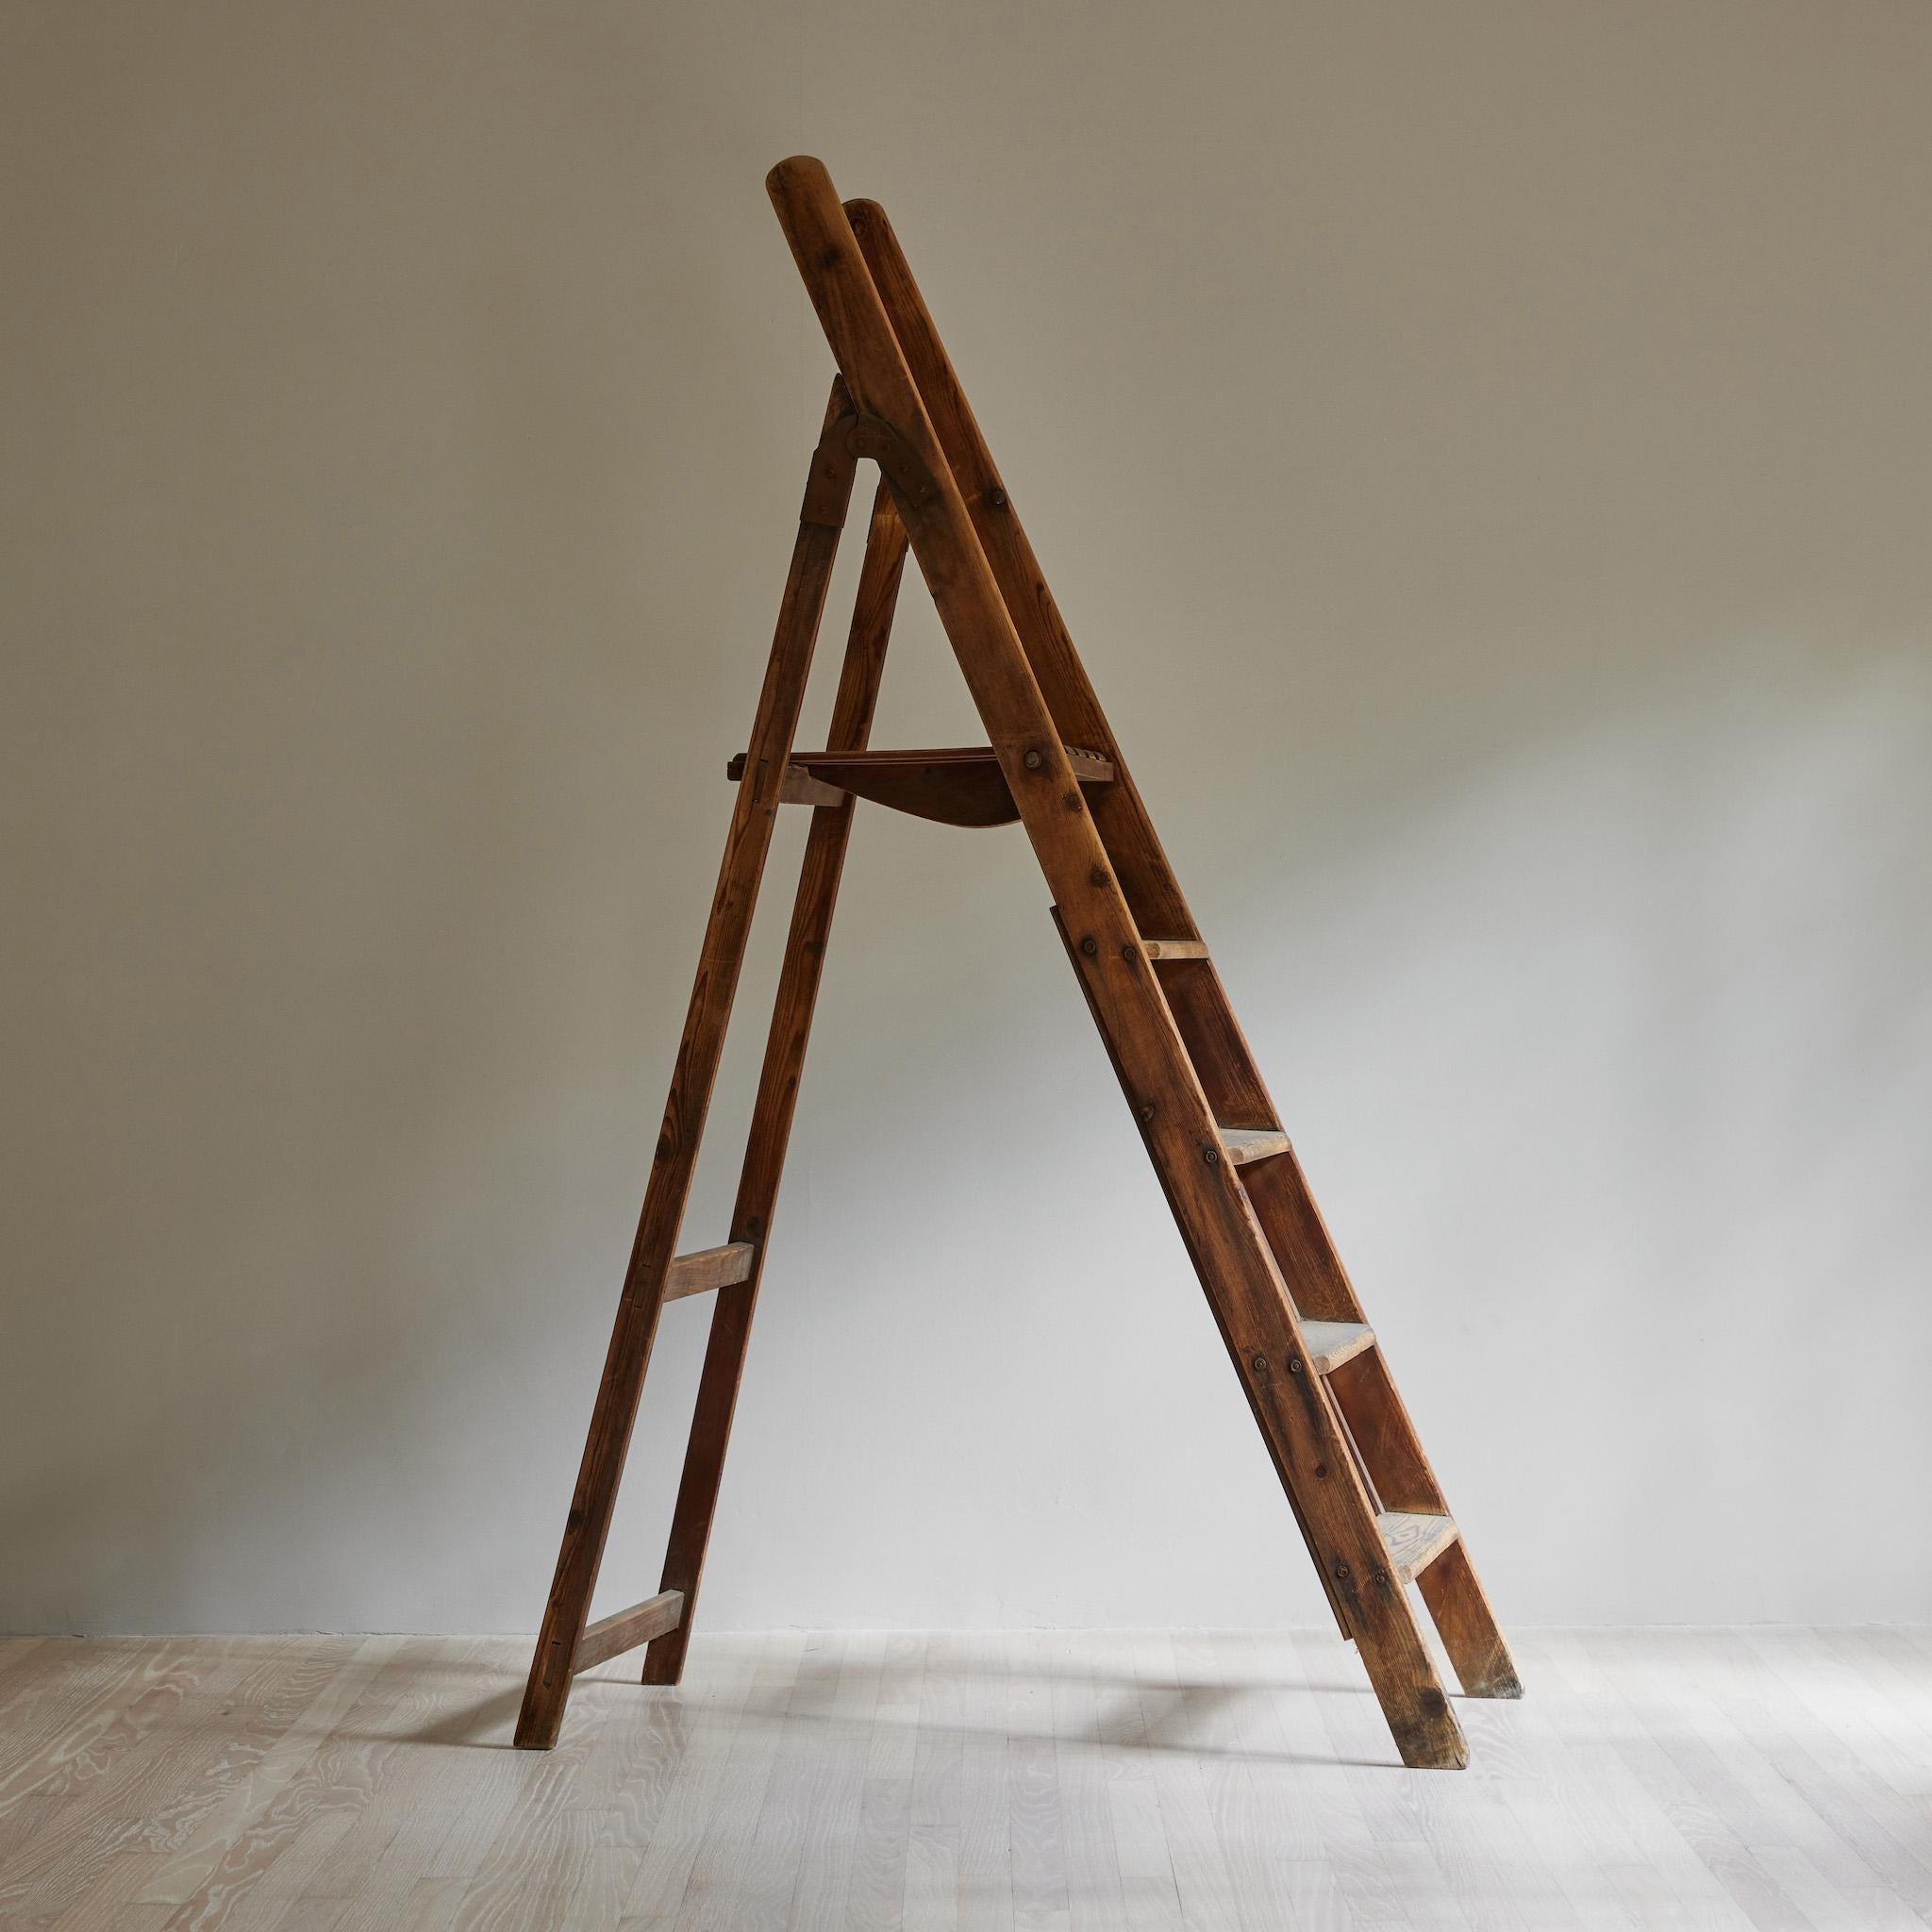 Aesthetic Movement Folding Wooden Library Ladder from Late 19th Century France